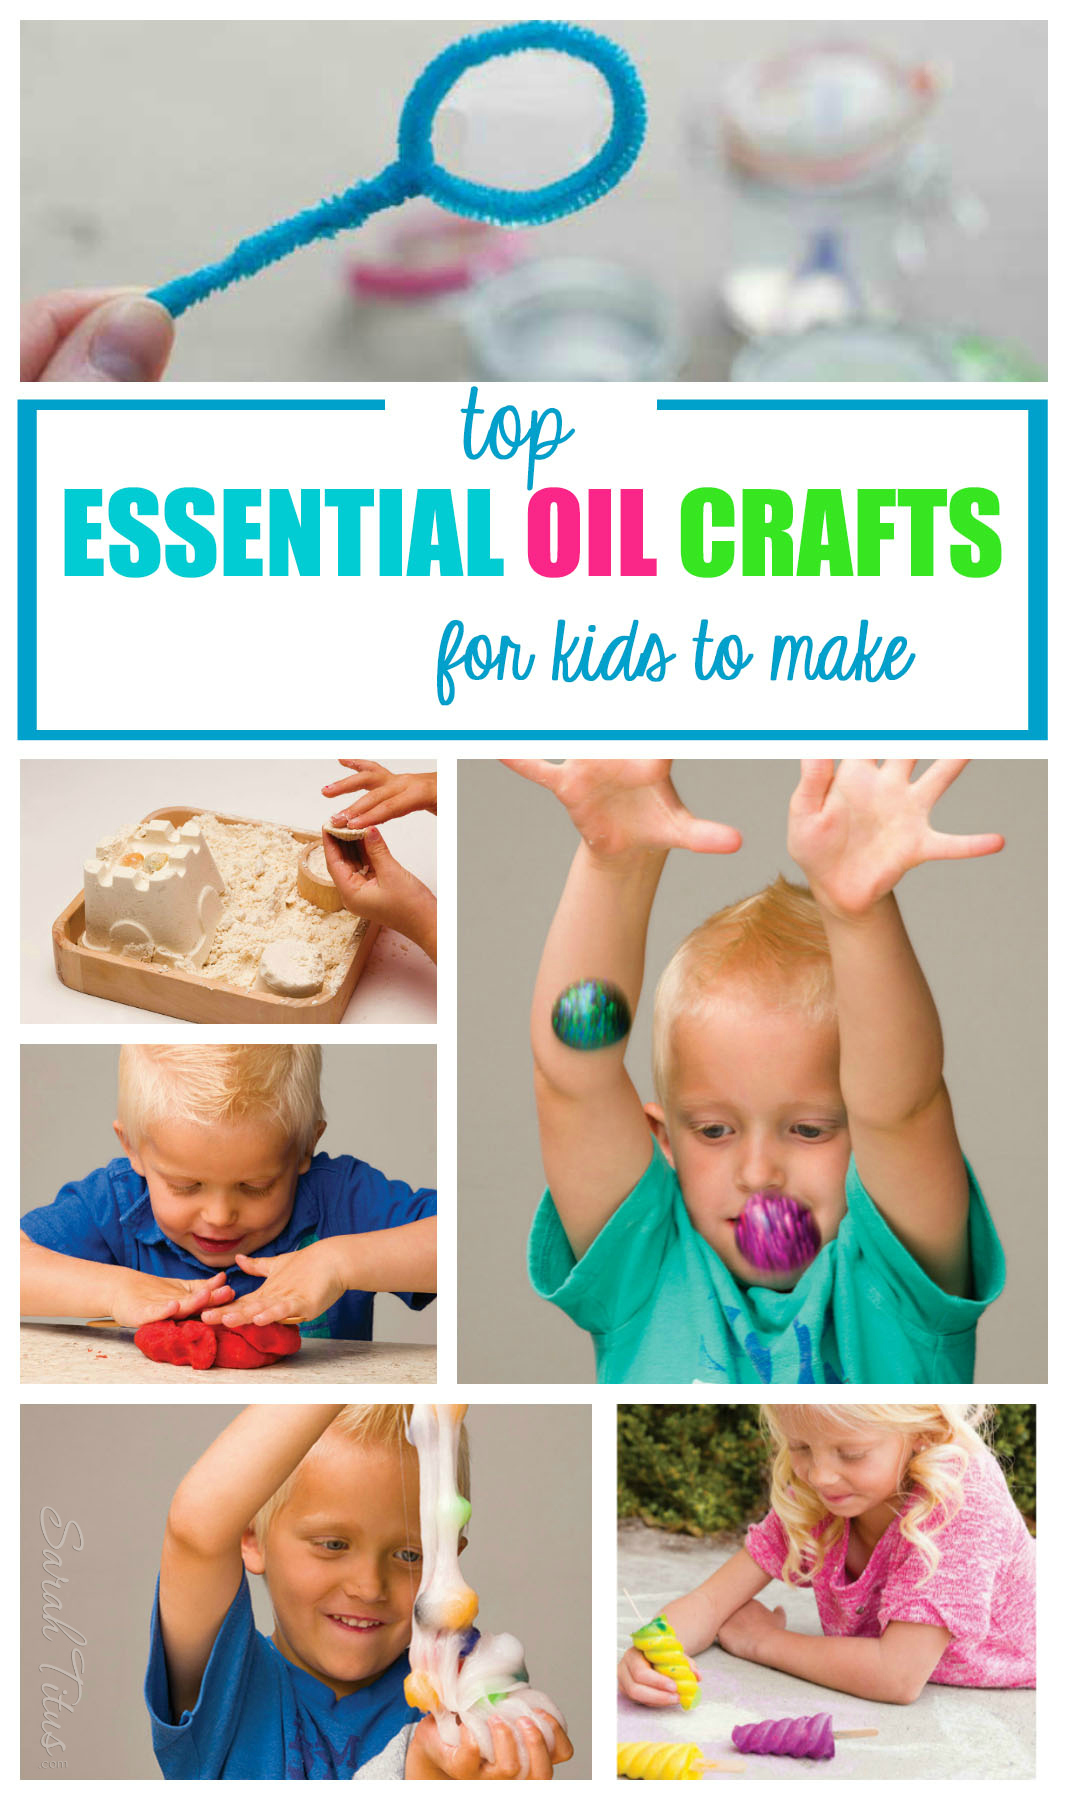 Top Essential Oil Crafts for Kids to Make: Chalksicles, bouncy balls, polka dot slime, bubbles, playdough, flubber, moon sand, kids paints.